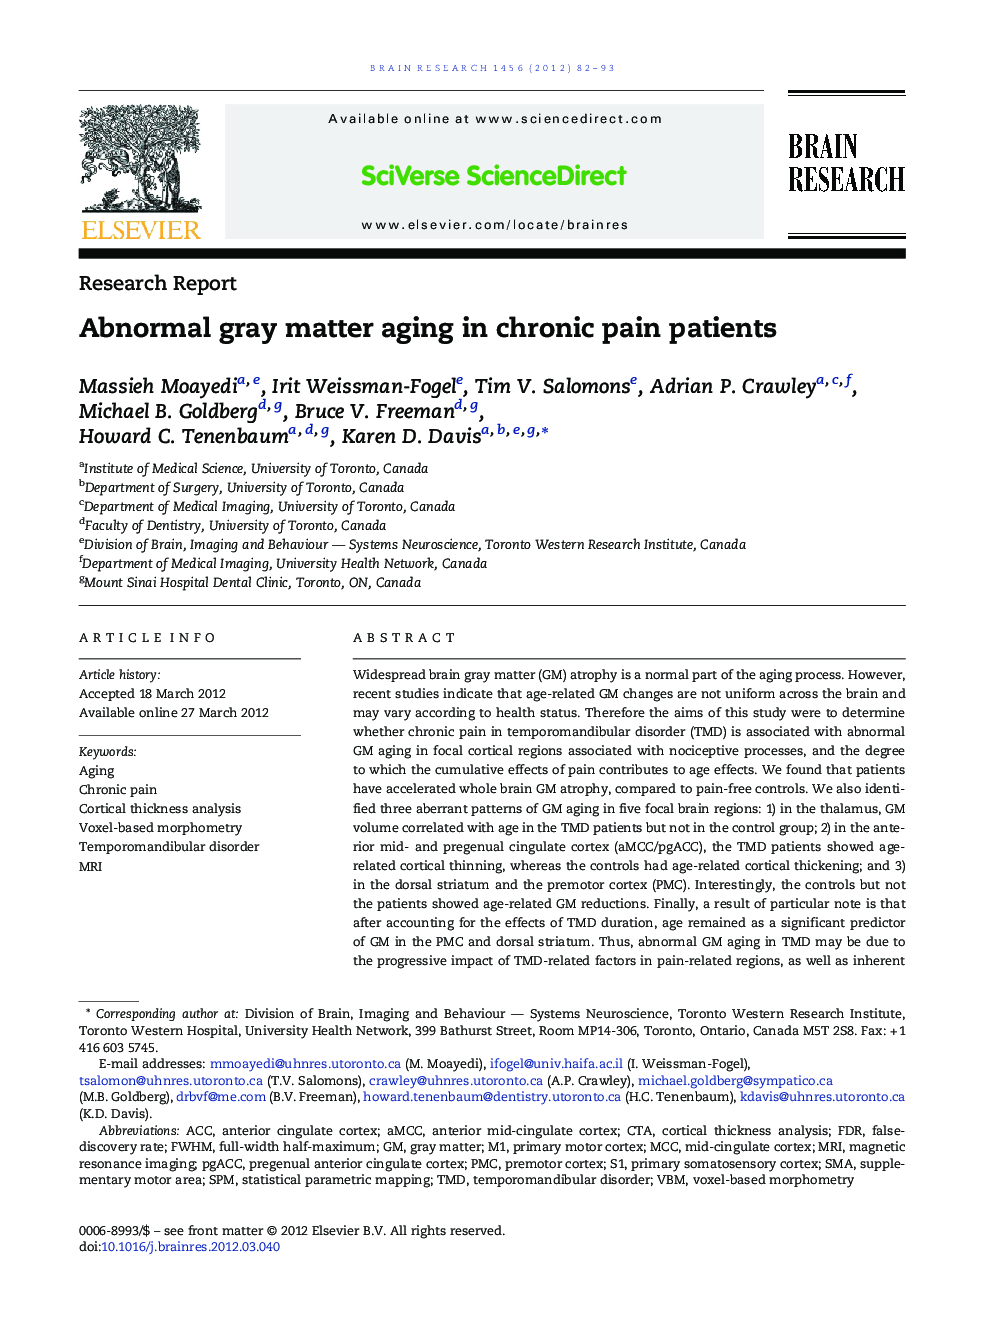 Research ReportAbnormal gray matter aging in chronic pain patients